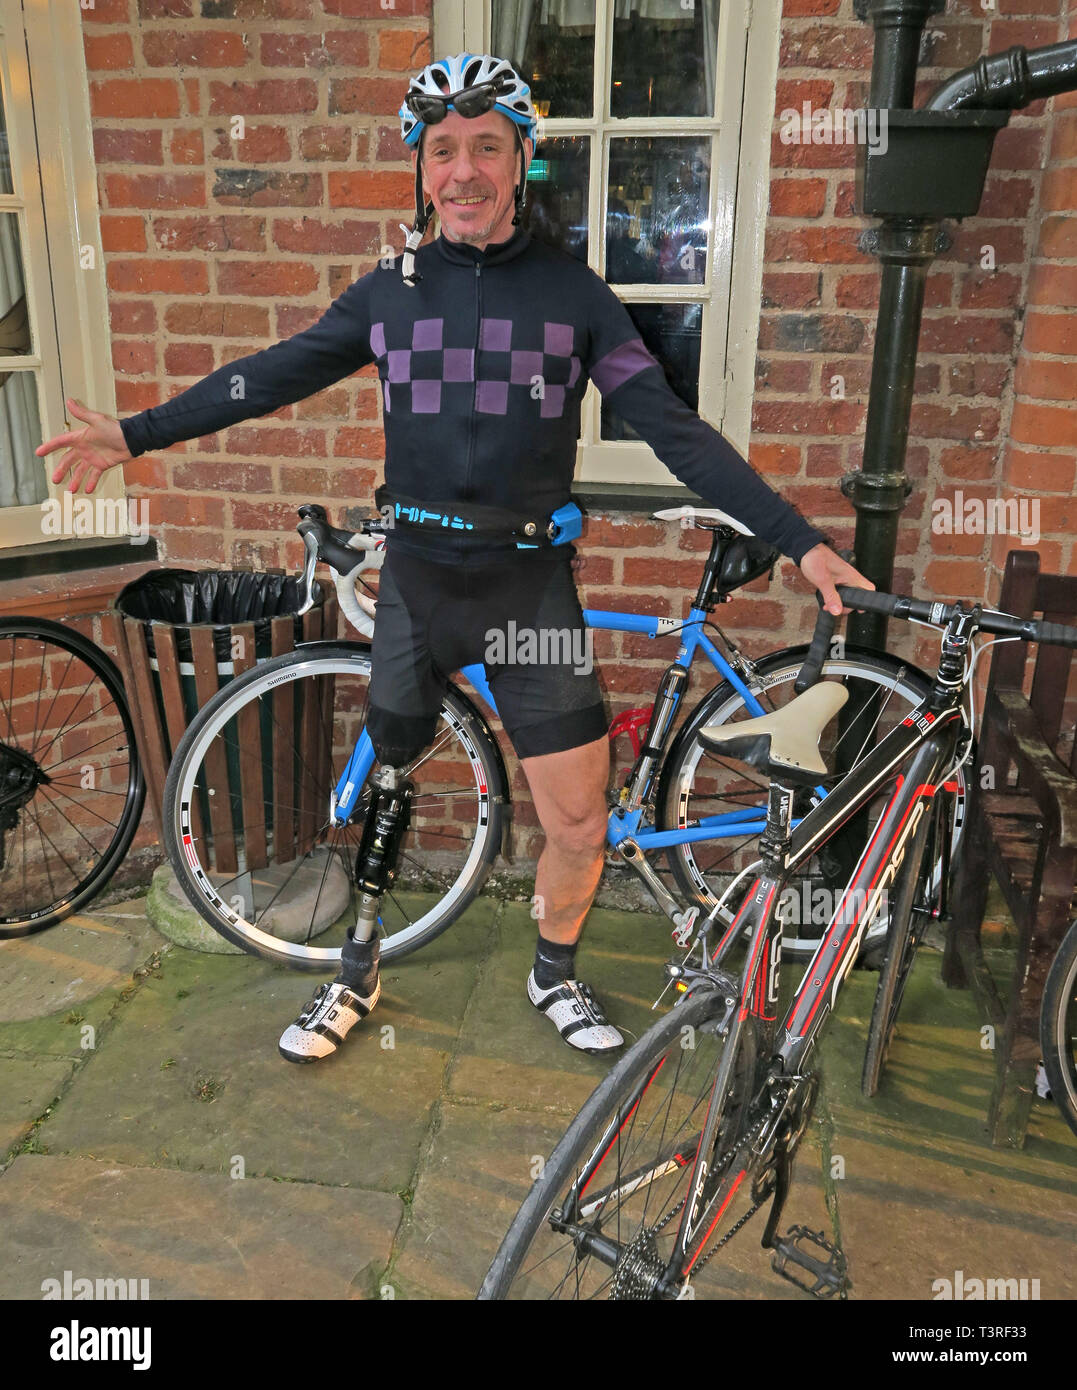 Keith, cyclist cycling with a prosthetic leg, in Lycra cycling clothing, at the Vine Inn, Barns Lane, Dunham Town, Cheshire, England, UK, WA14 5RU Stock Photo